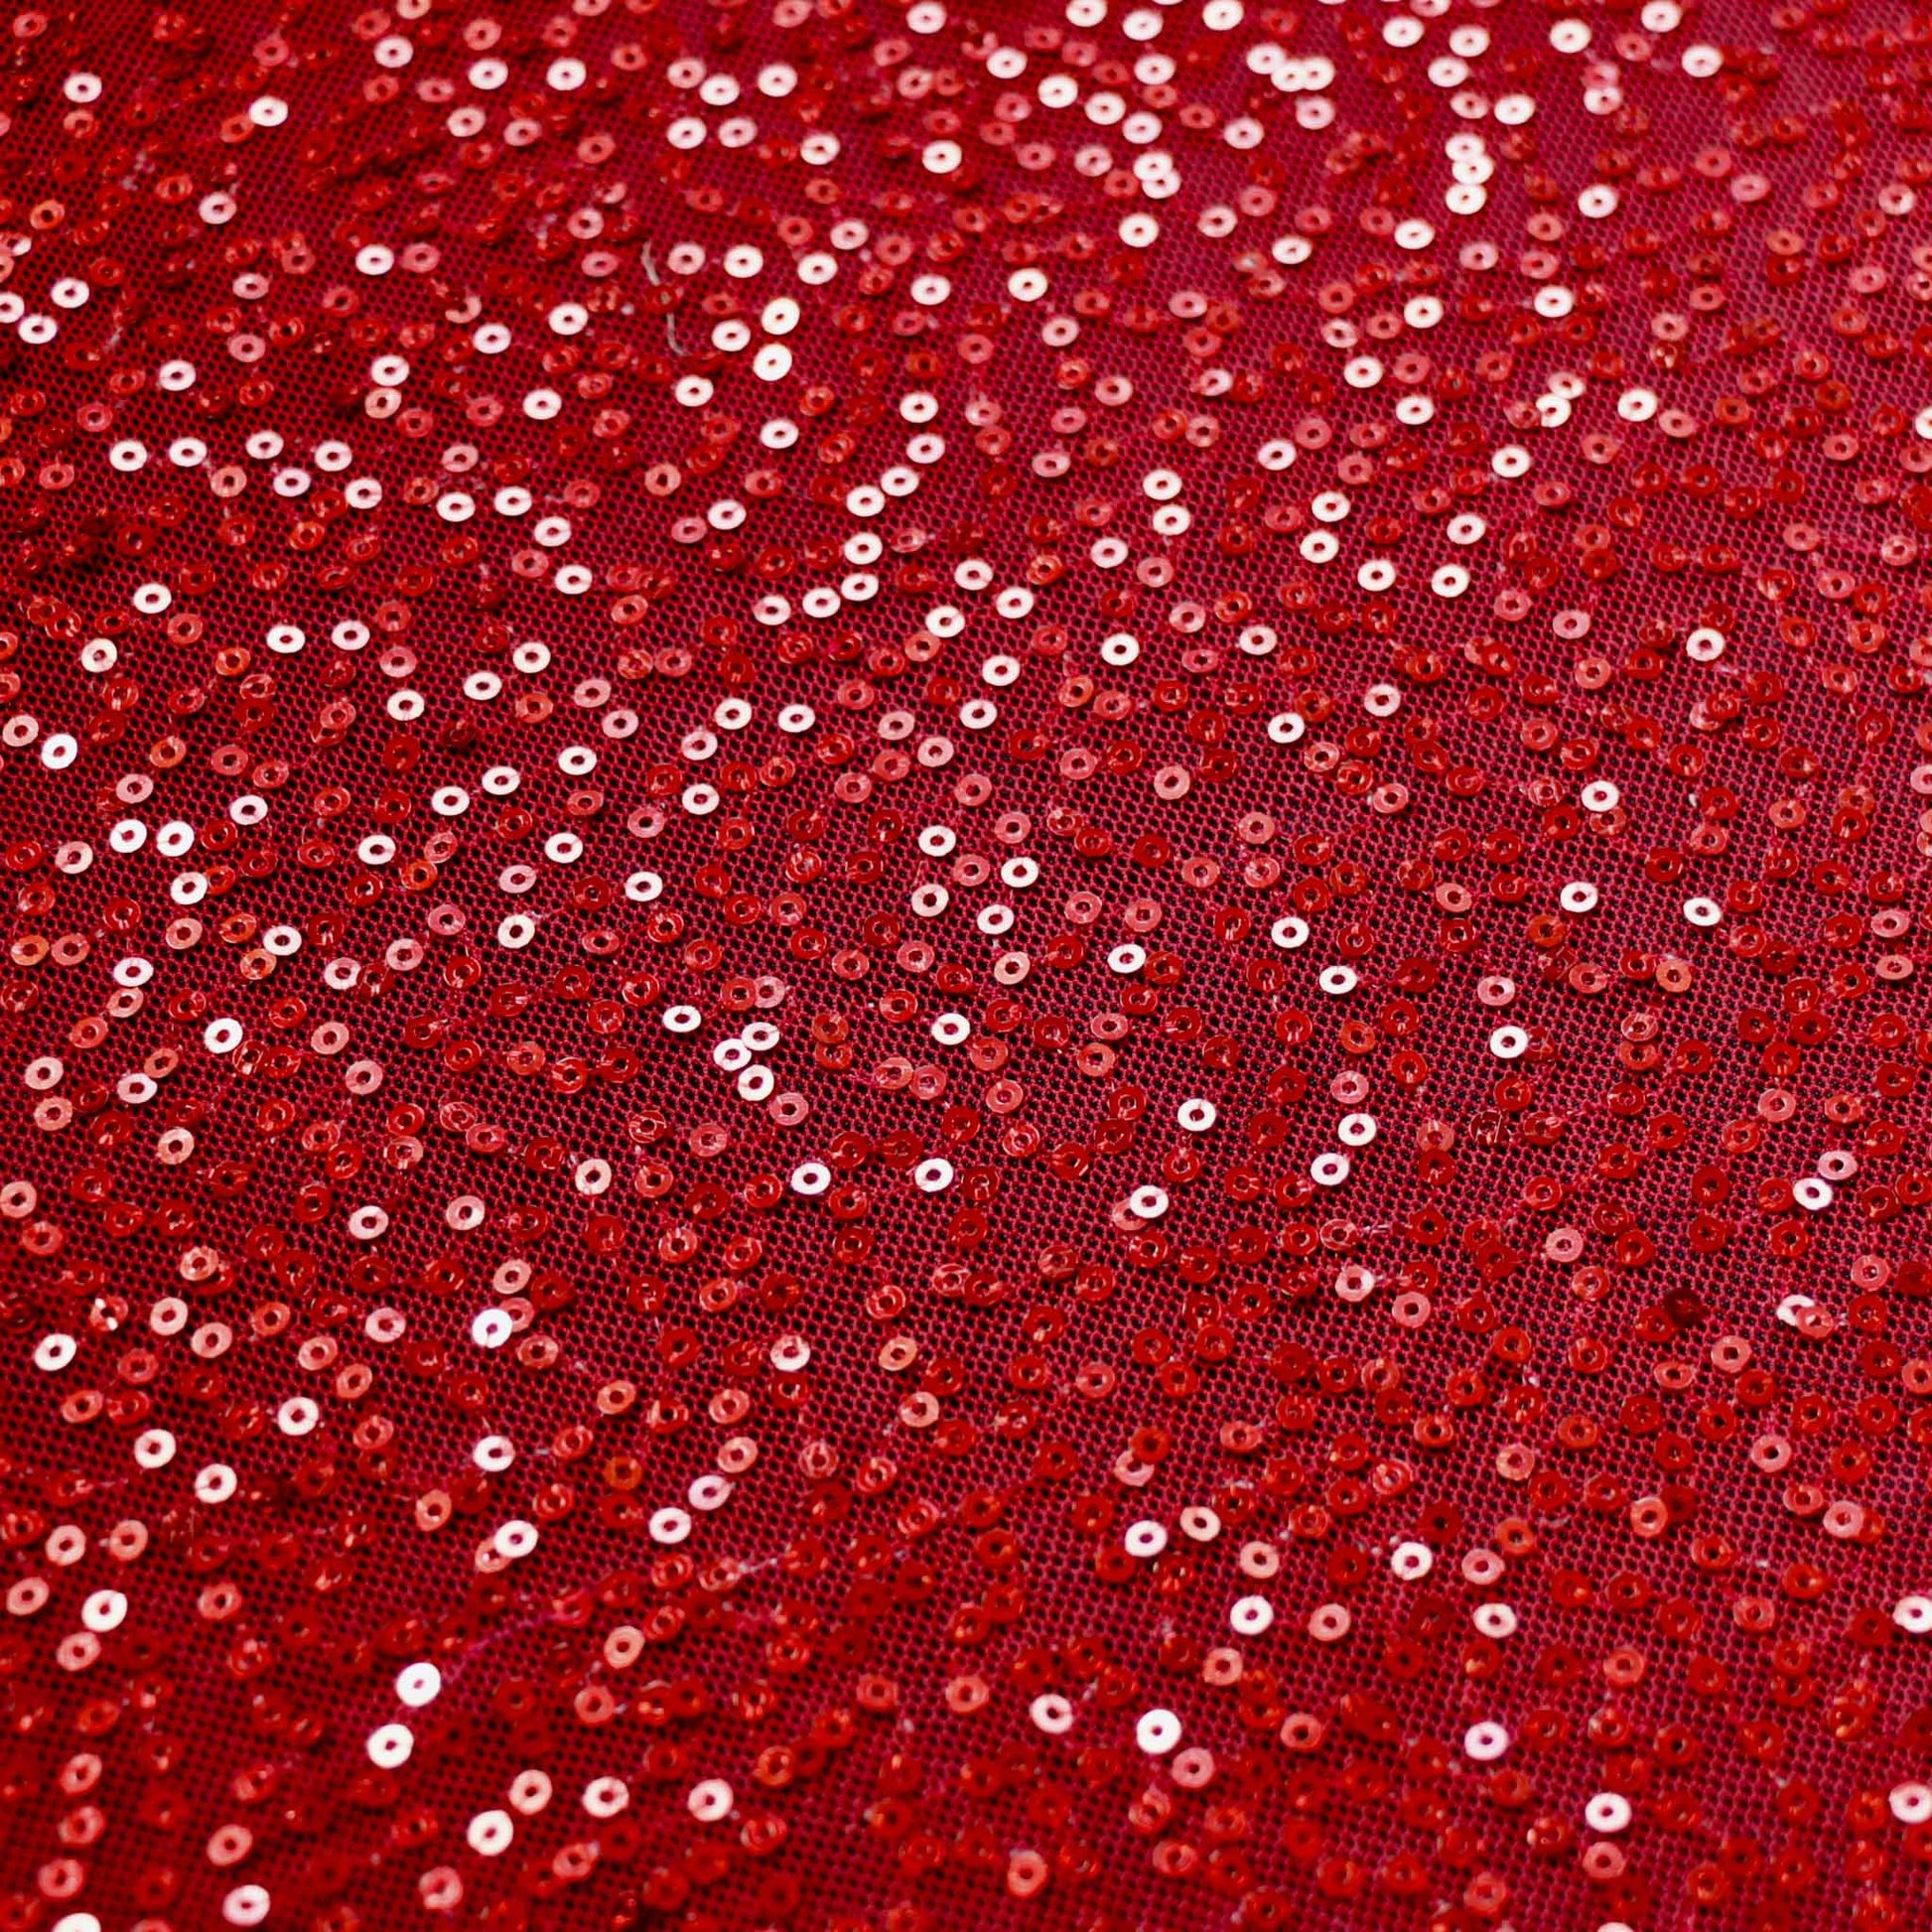 Sequin Fabric - Red or blue